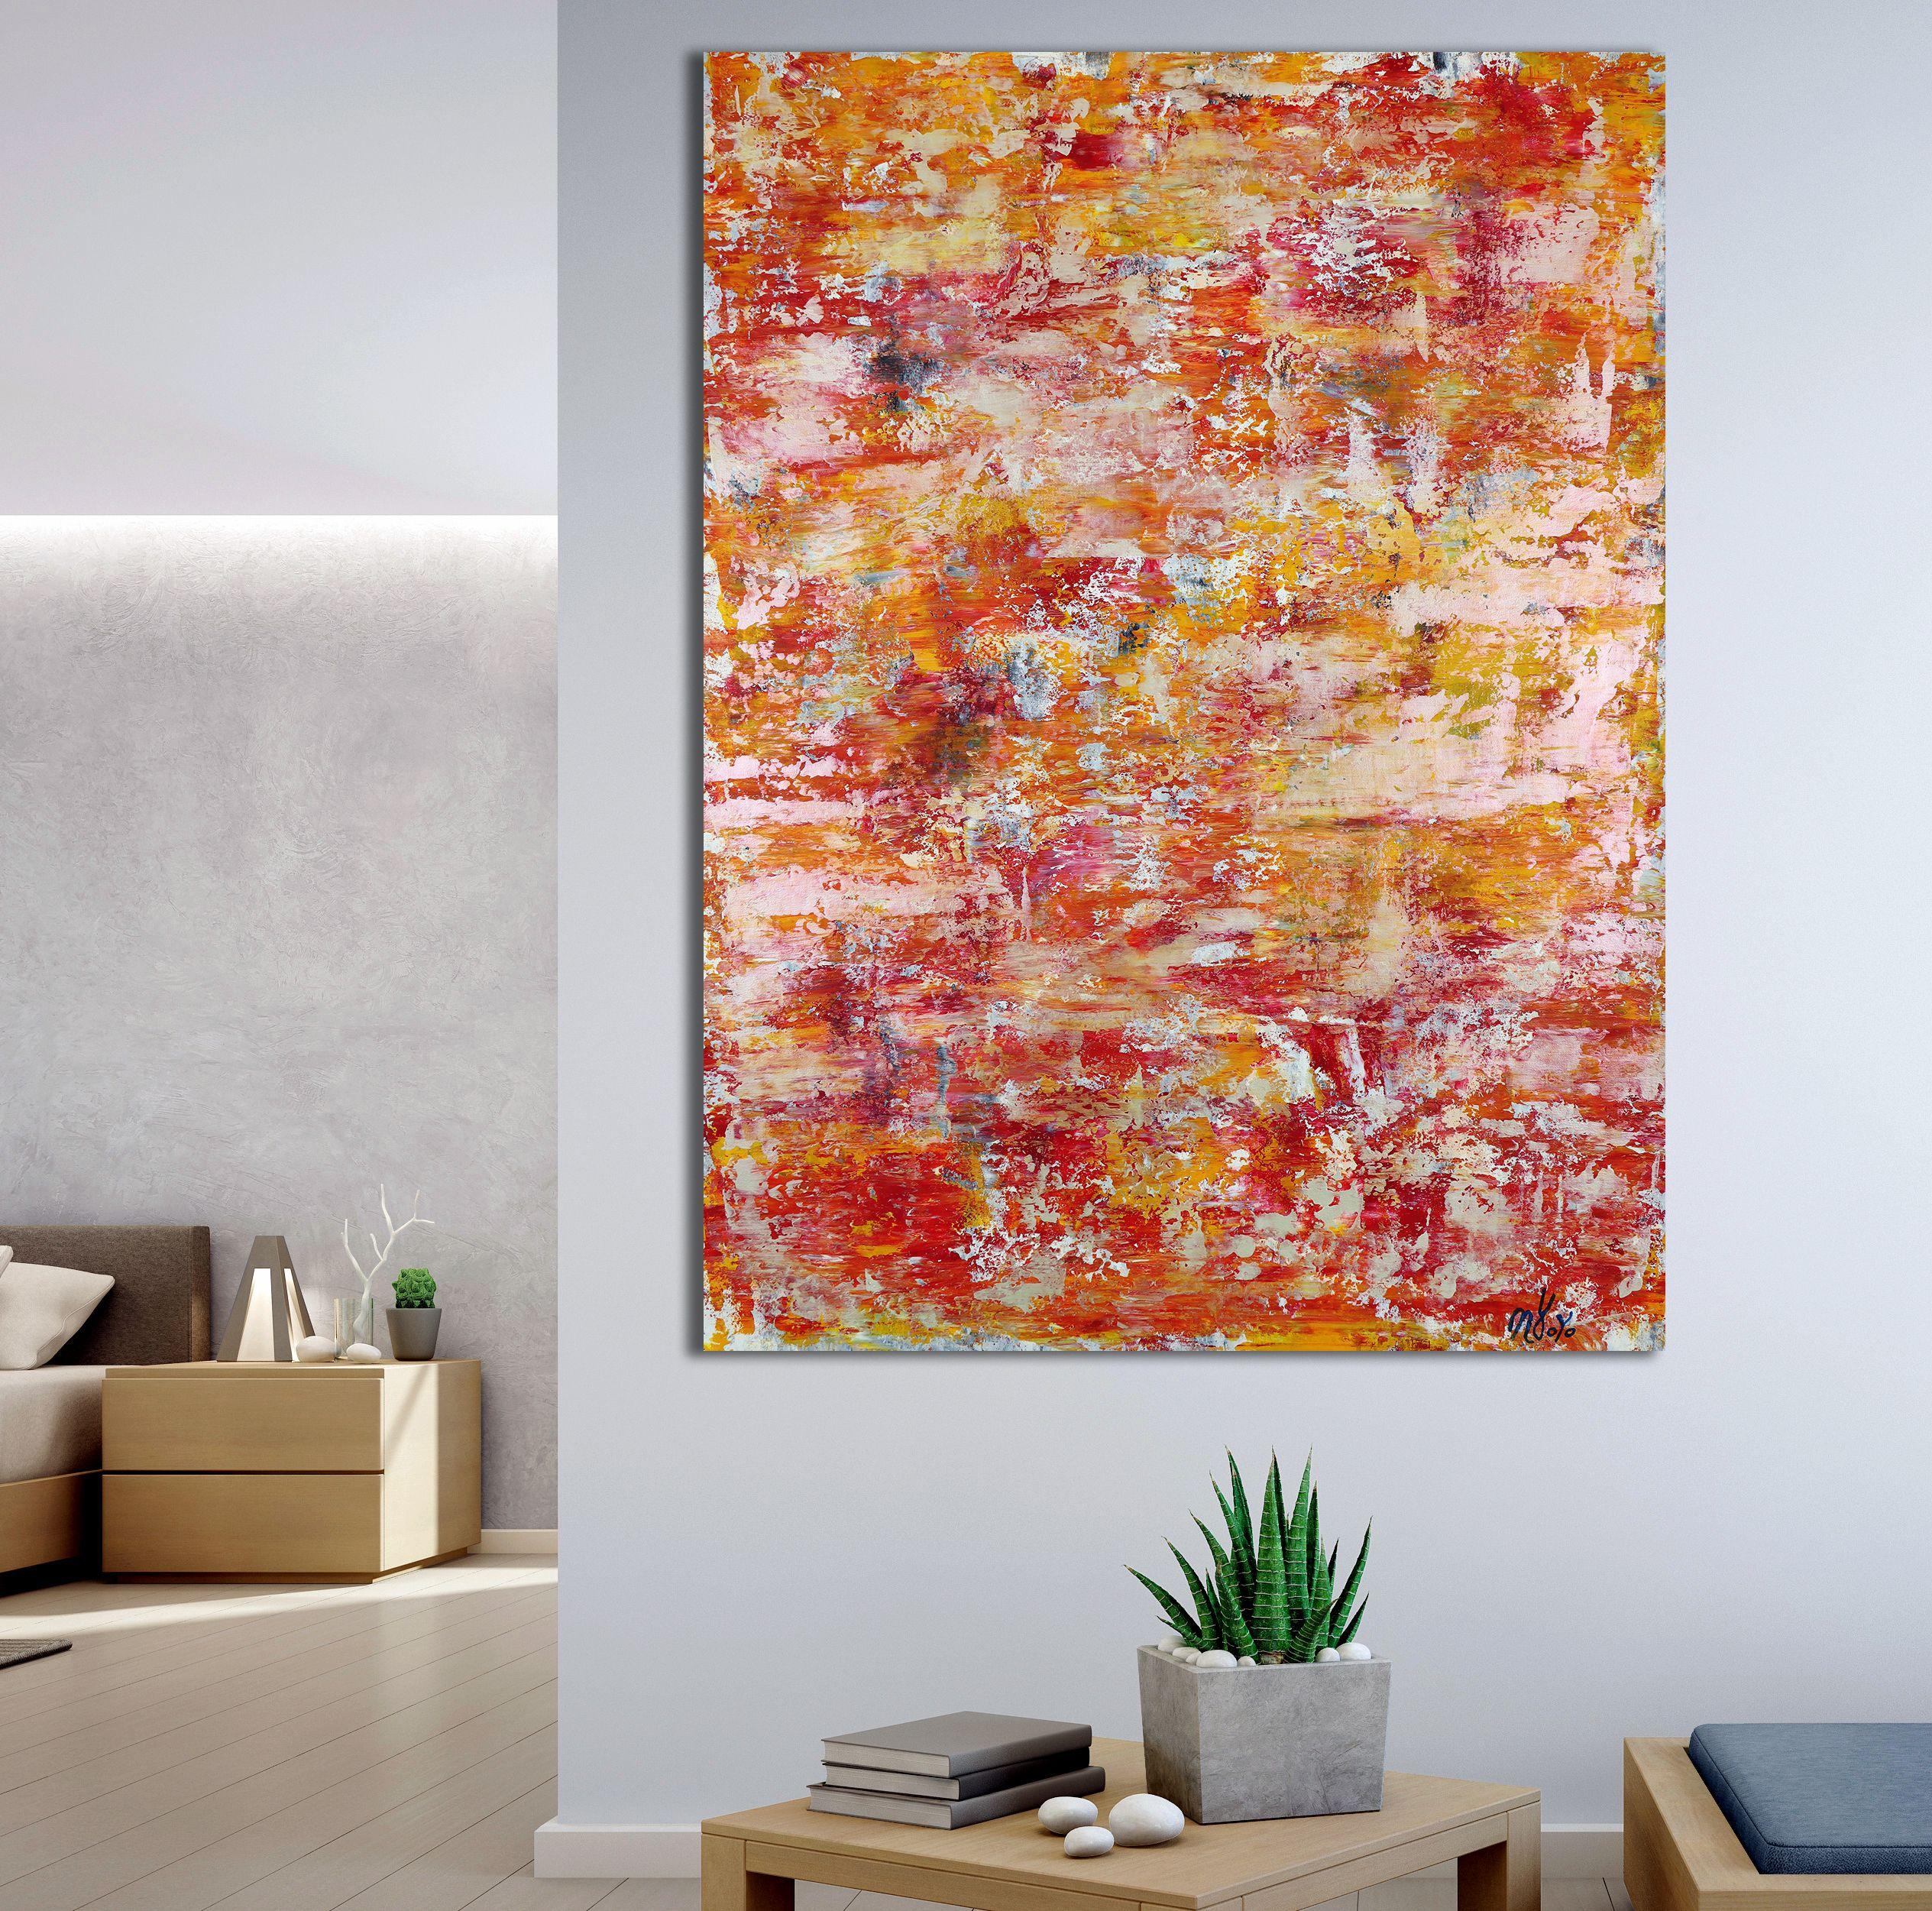 abstract minimalist painting  acrylic on canvas    This artwork was created layering and blending thin layers of orange, Burnt sienna, yellow, a little blue, white and iridescent orange.    Unframed dimensions 42 W x 56 H    For this work I used a